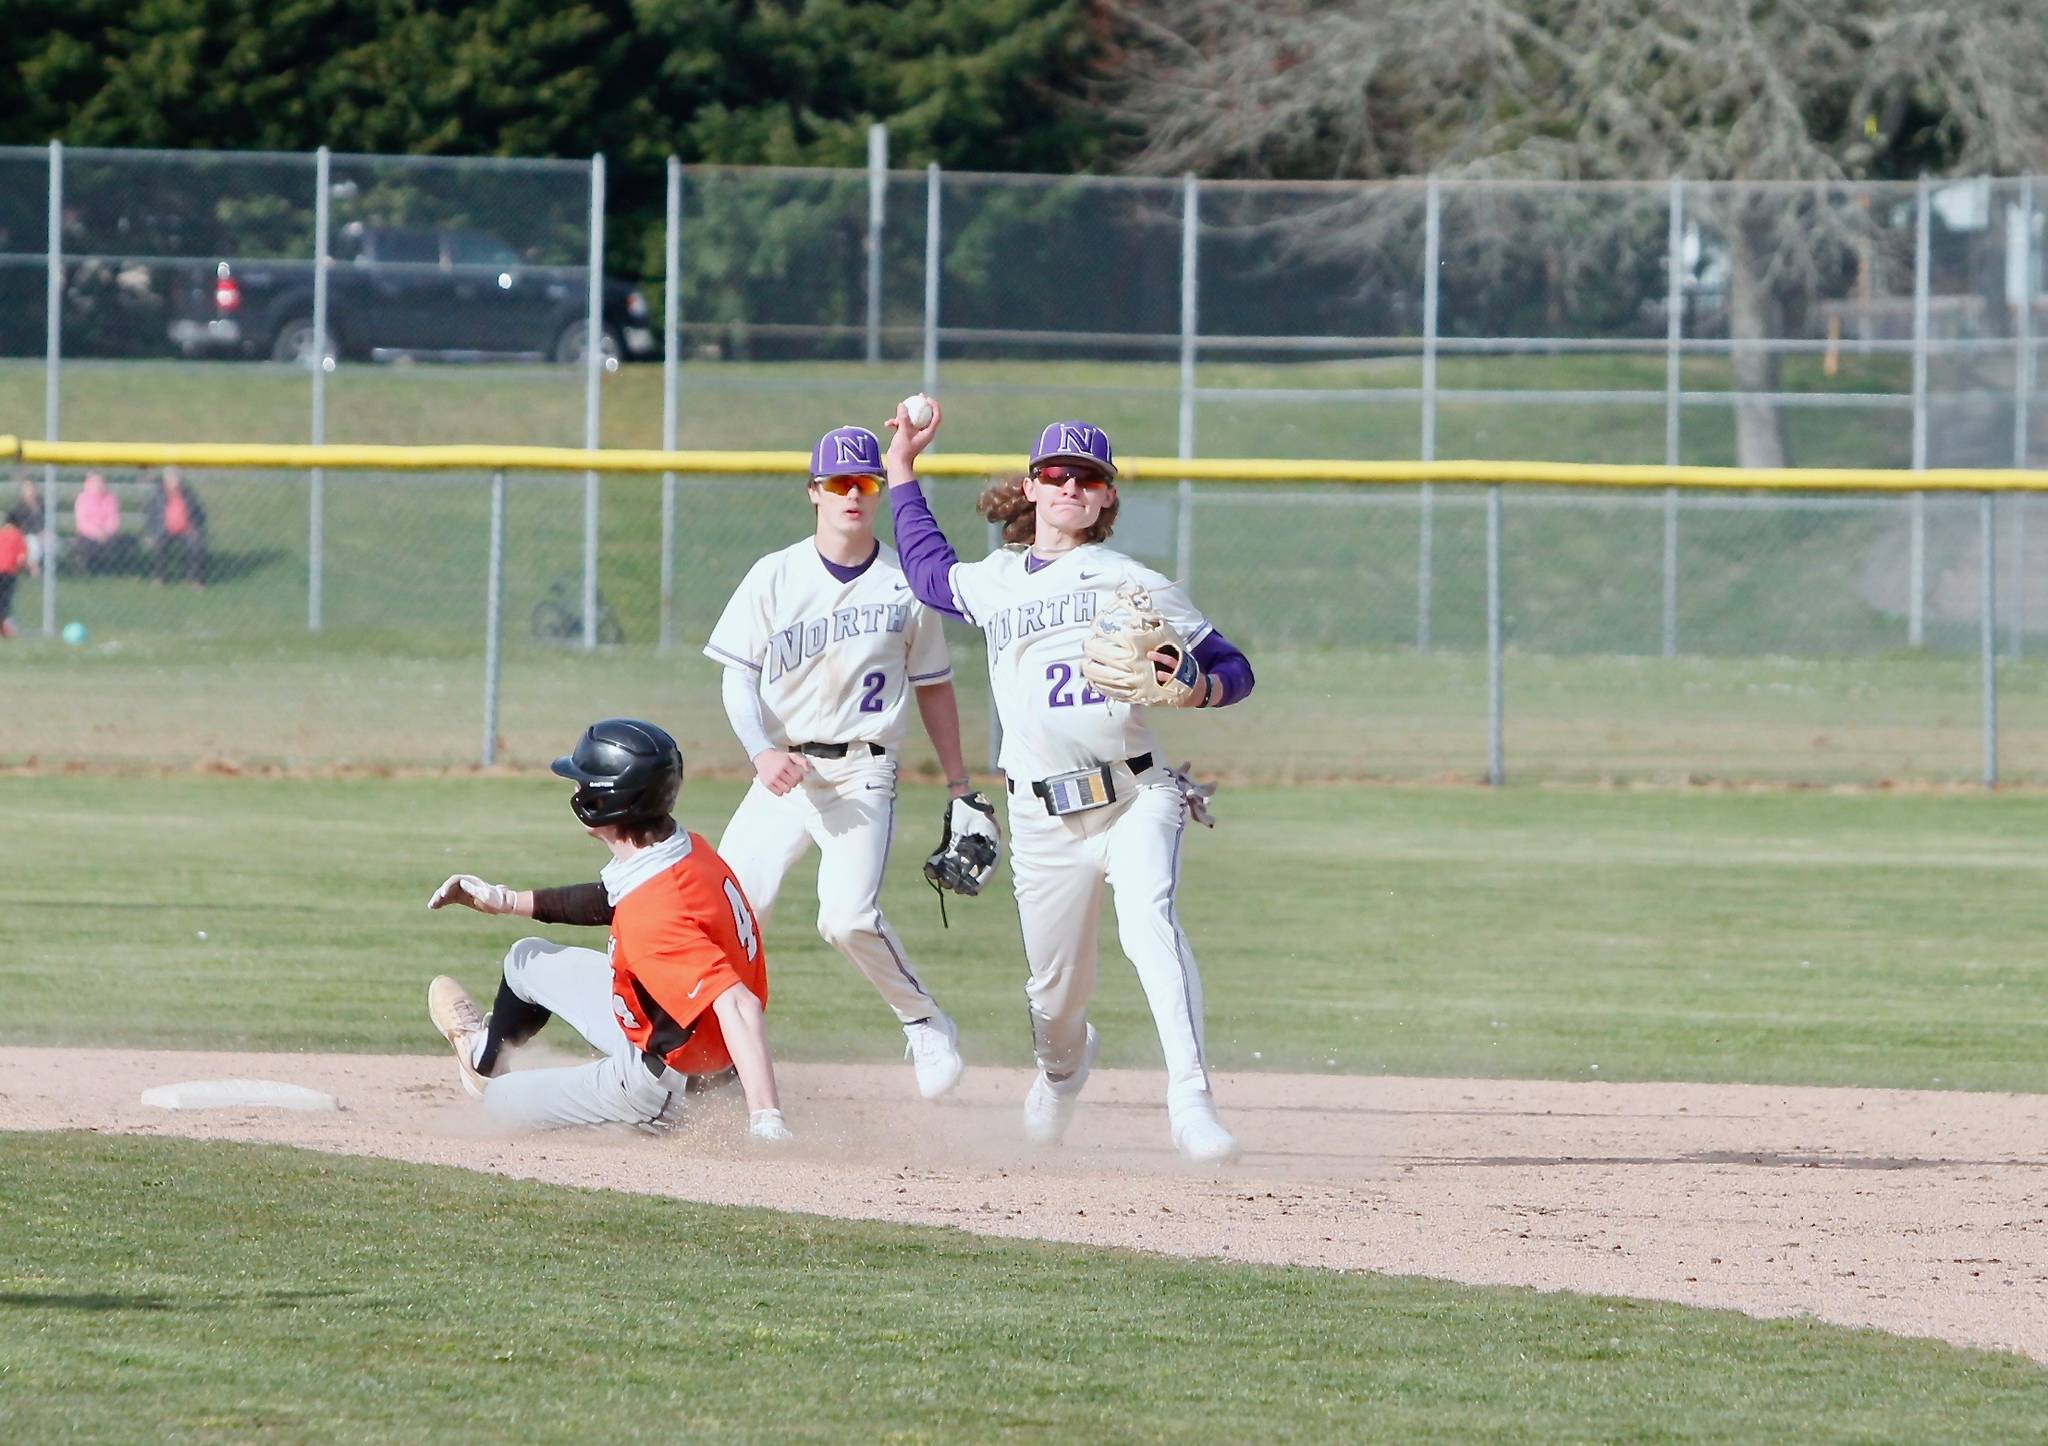 Jaxson Gore (22) makes the throw to complete the double play against Central Kitsap. (Mark Krulish/Kitsap News Group)